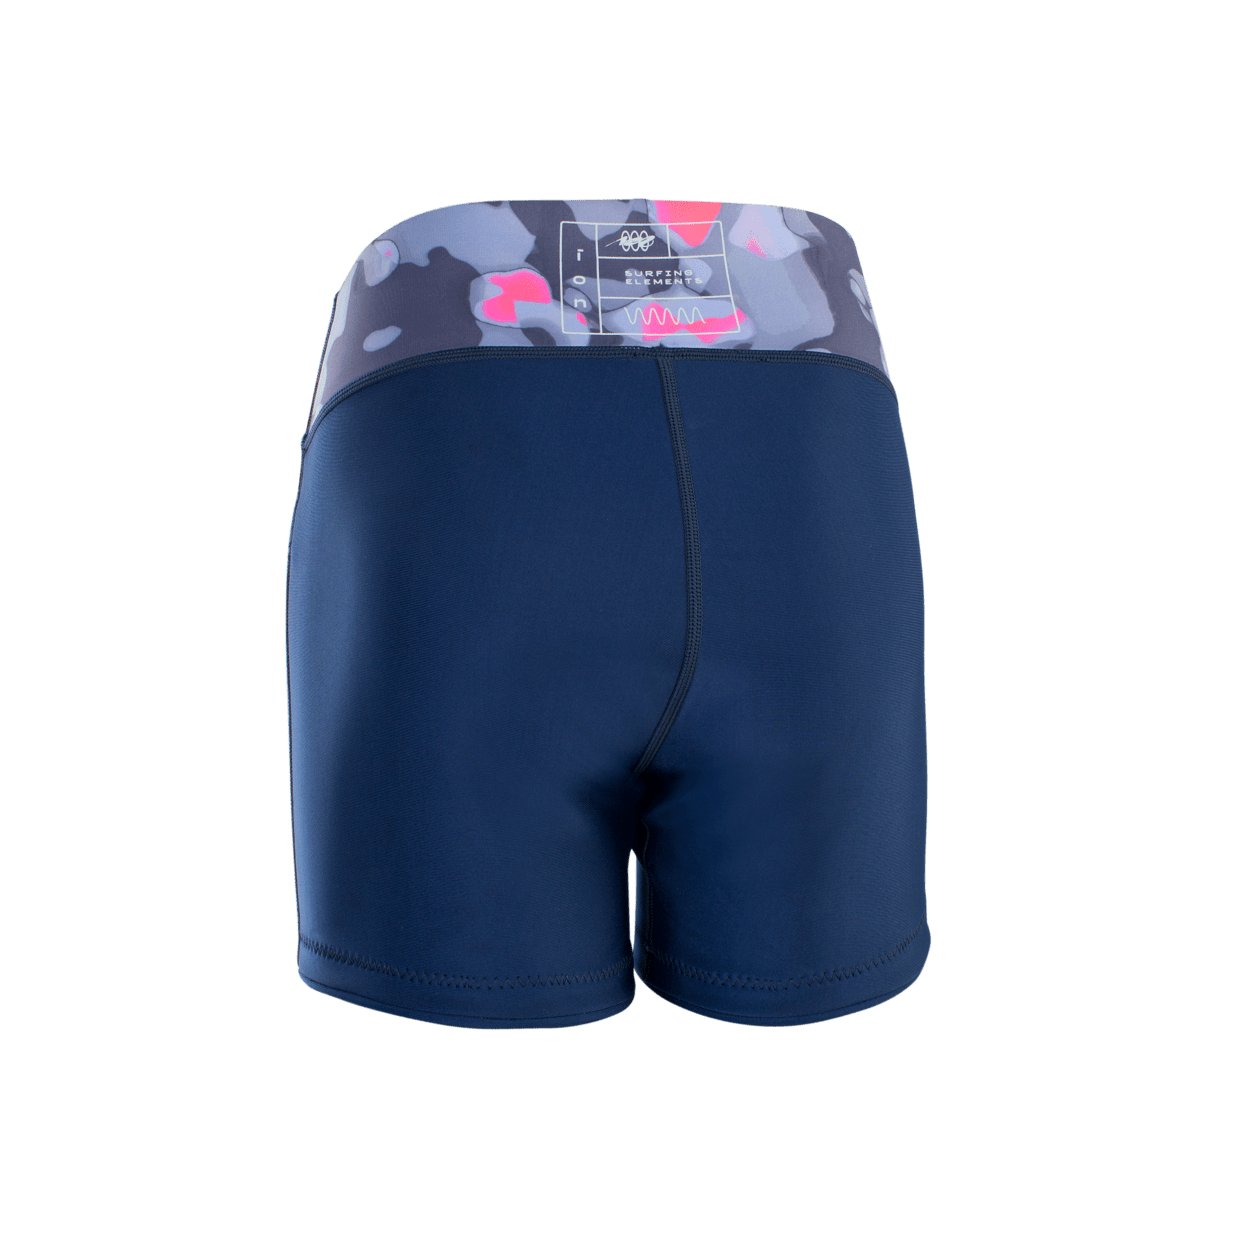 ION Neo Shorts Women 2023 - Worthing Watersports - 9010583052496 - Tops - ION Water